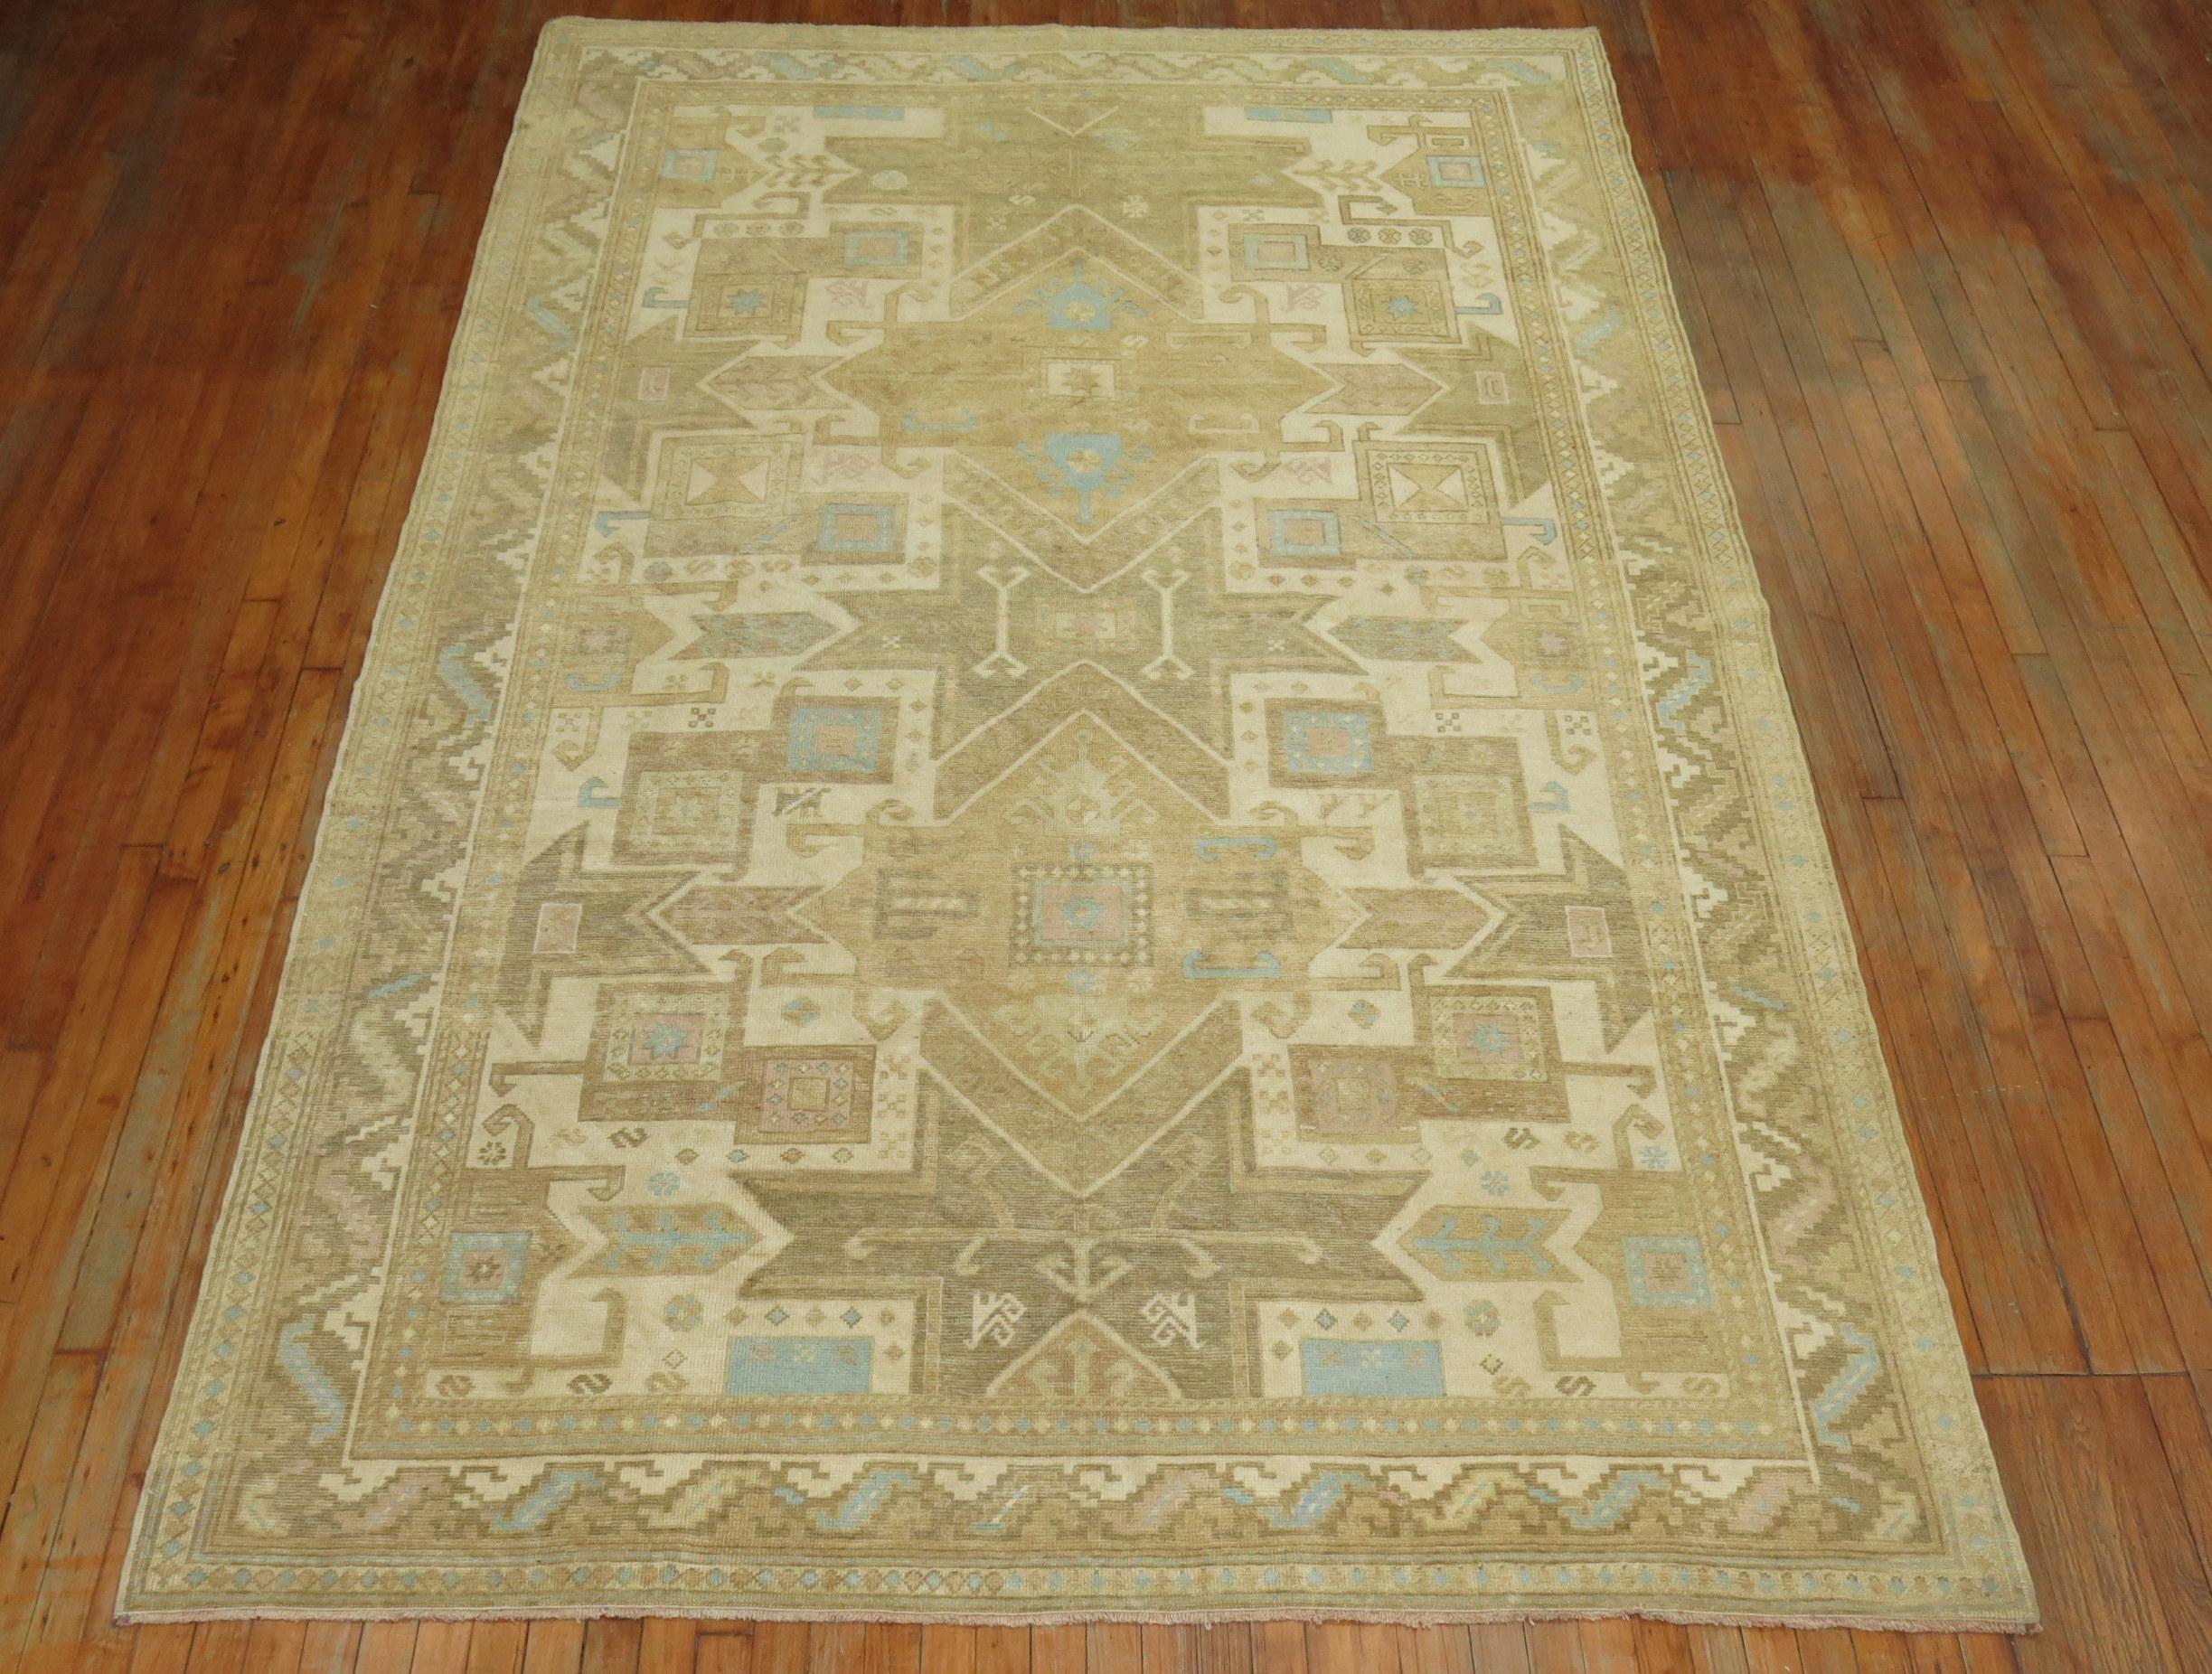 Mid-20th century Oushak with a motif derived from 19th century Caucasian carpets. Nice warm colors, accents in ivory, brown and light blue.